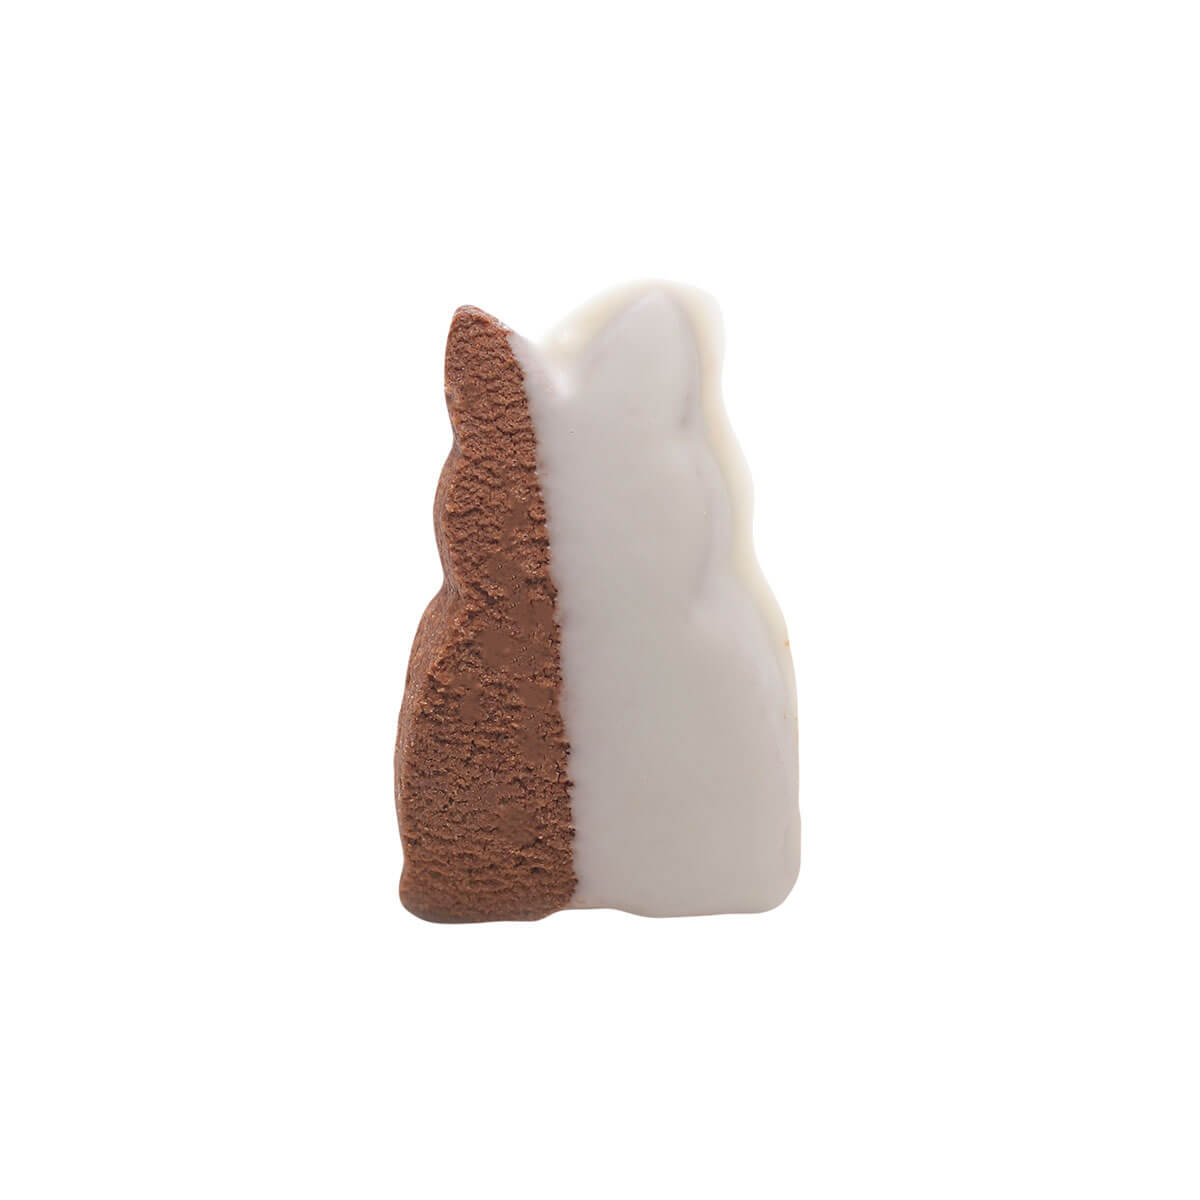 A buttery chocolate cookie shaped like a rabbit dipped in white chocolate.